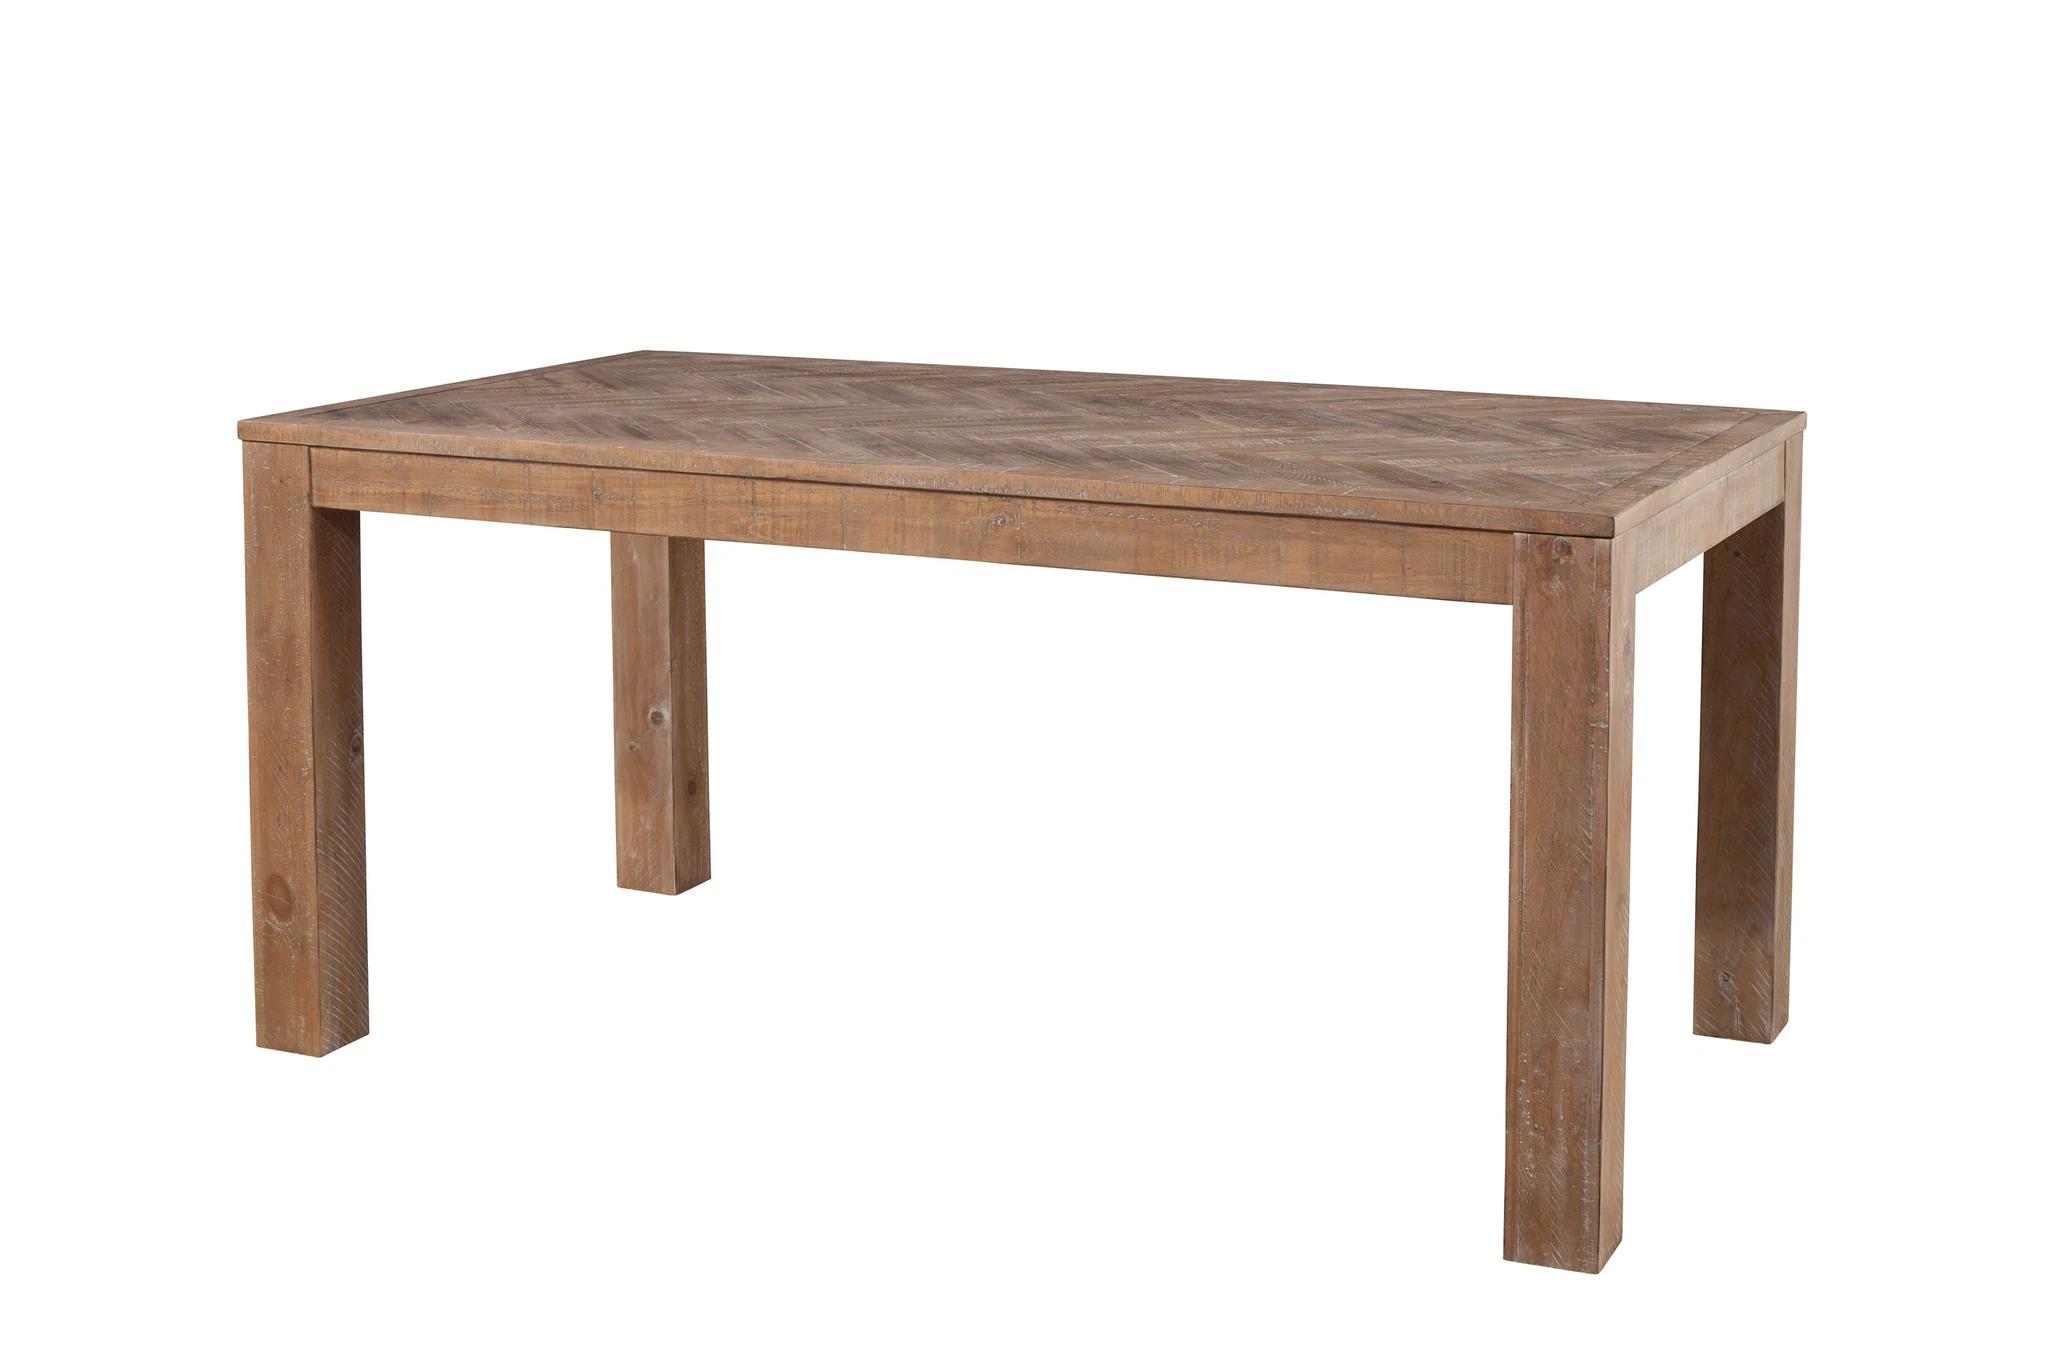 Contemporary, Rustic Dining Table AIDEN 3348-01 in Natural 